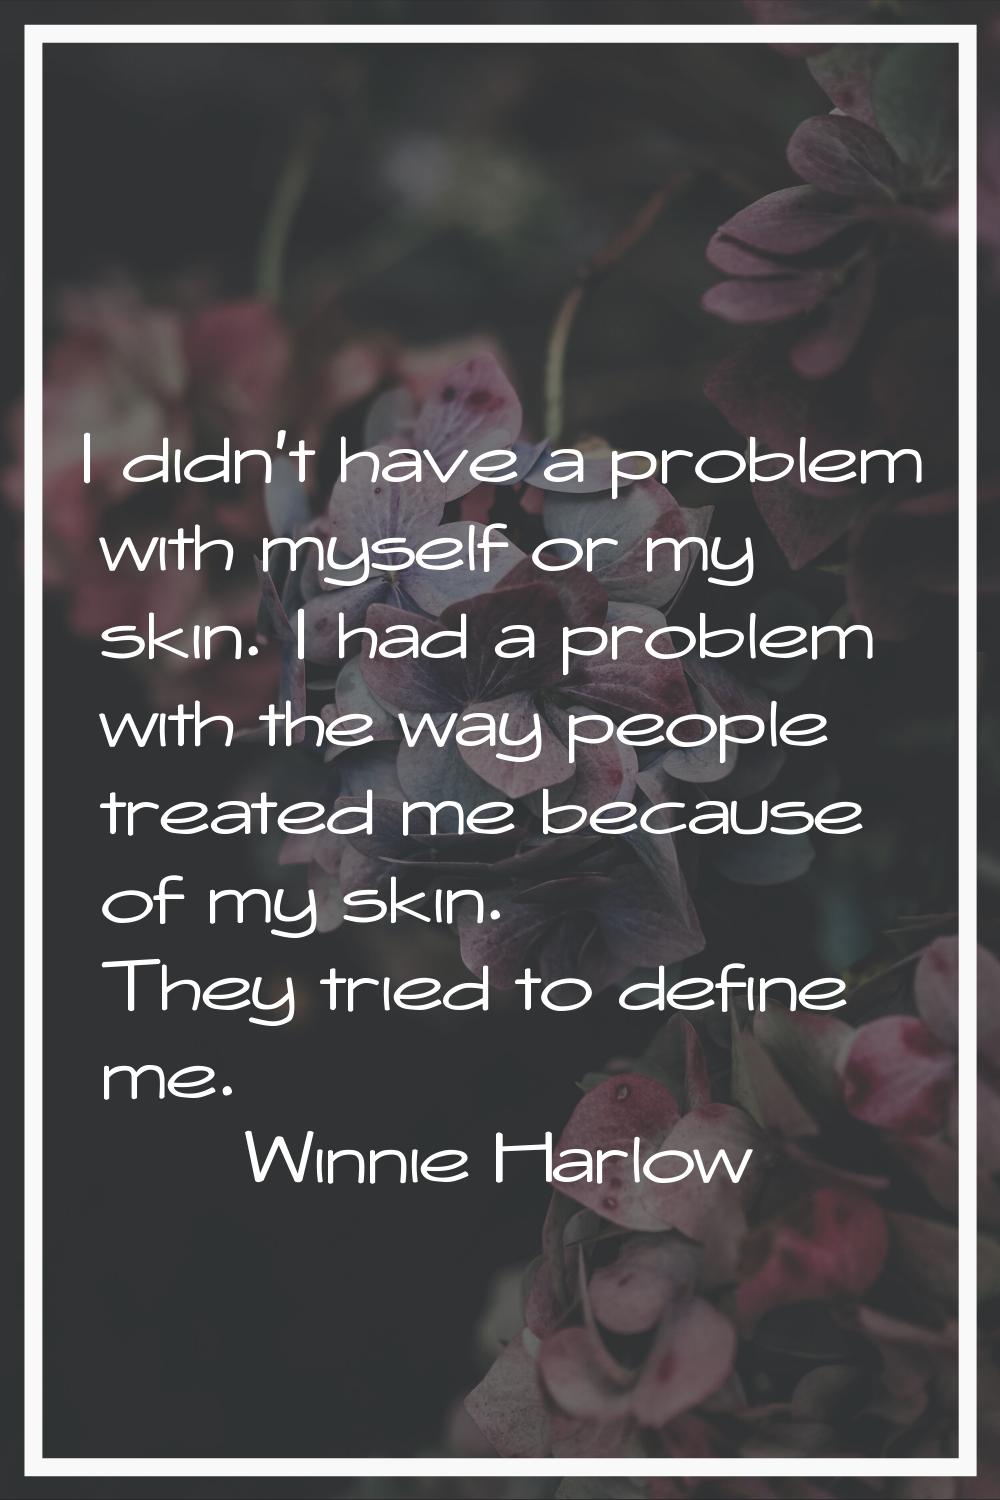 I didn't have a problem with myself or my skin. I had a problem with the way people treated me beca